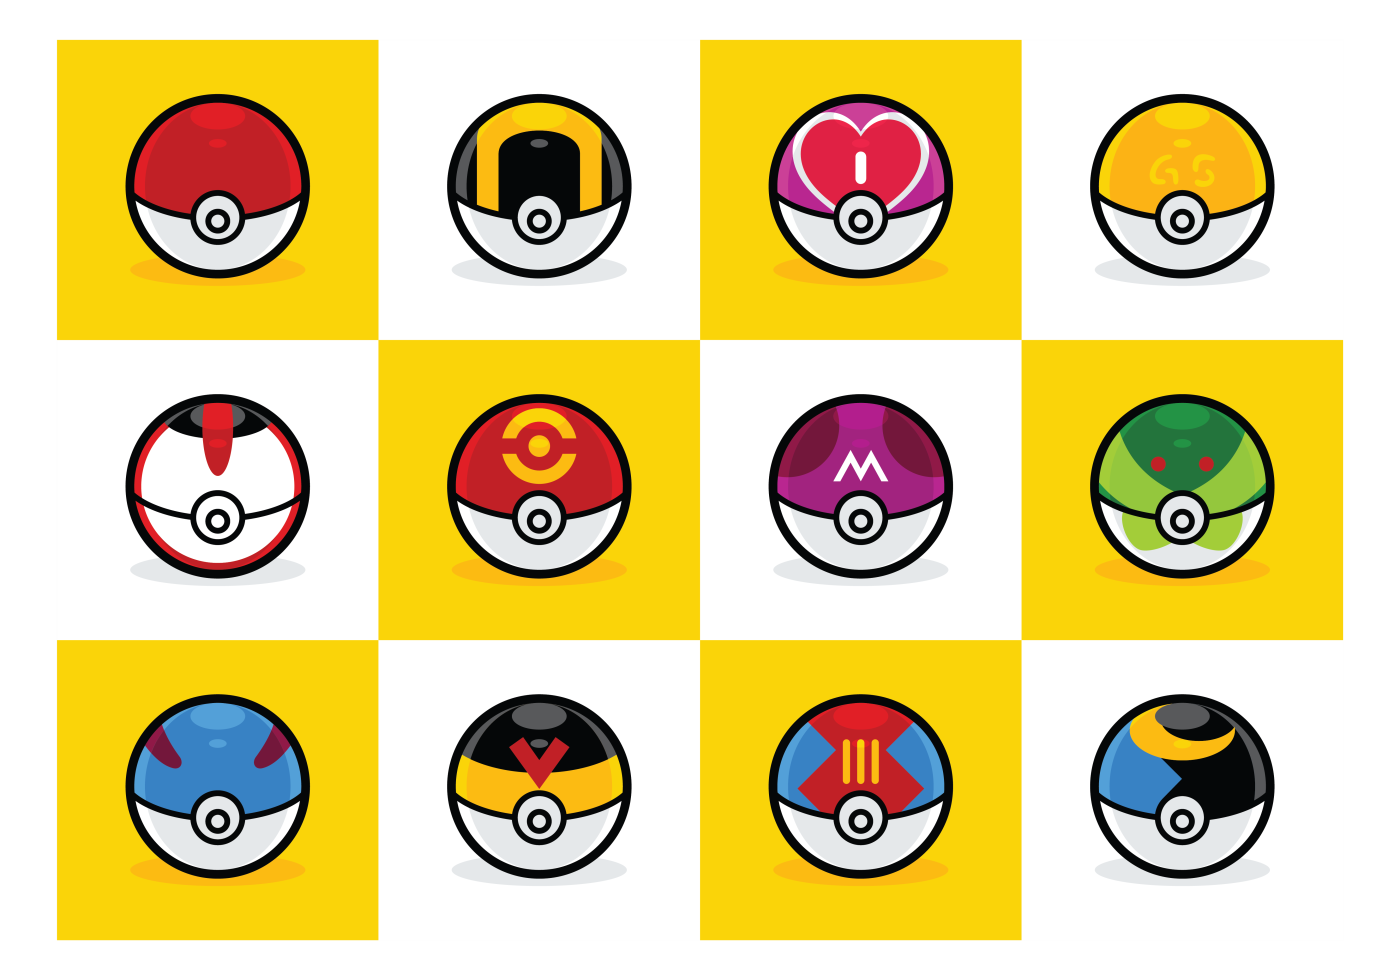 54. vector images for 'Pokeball'. 